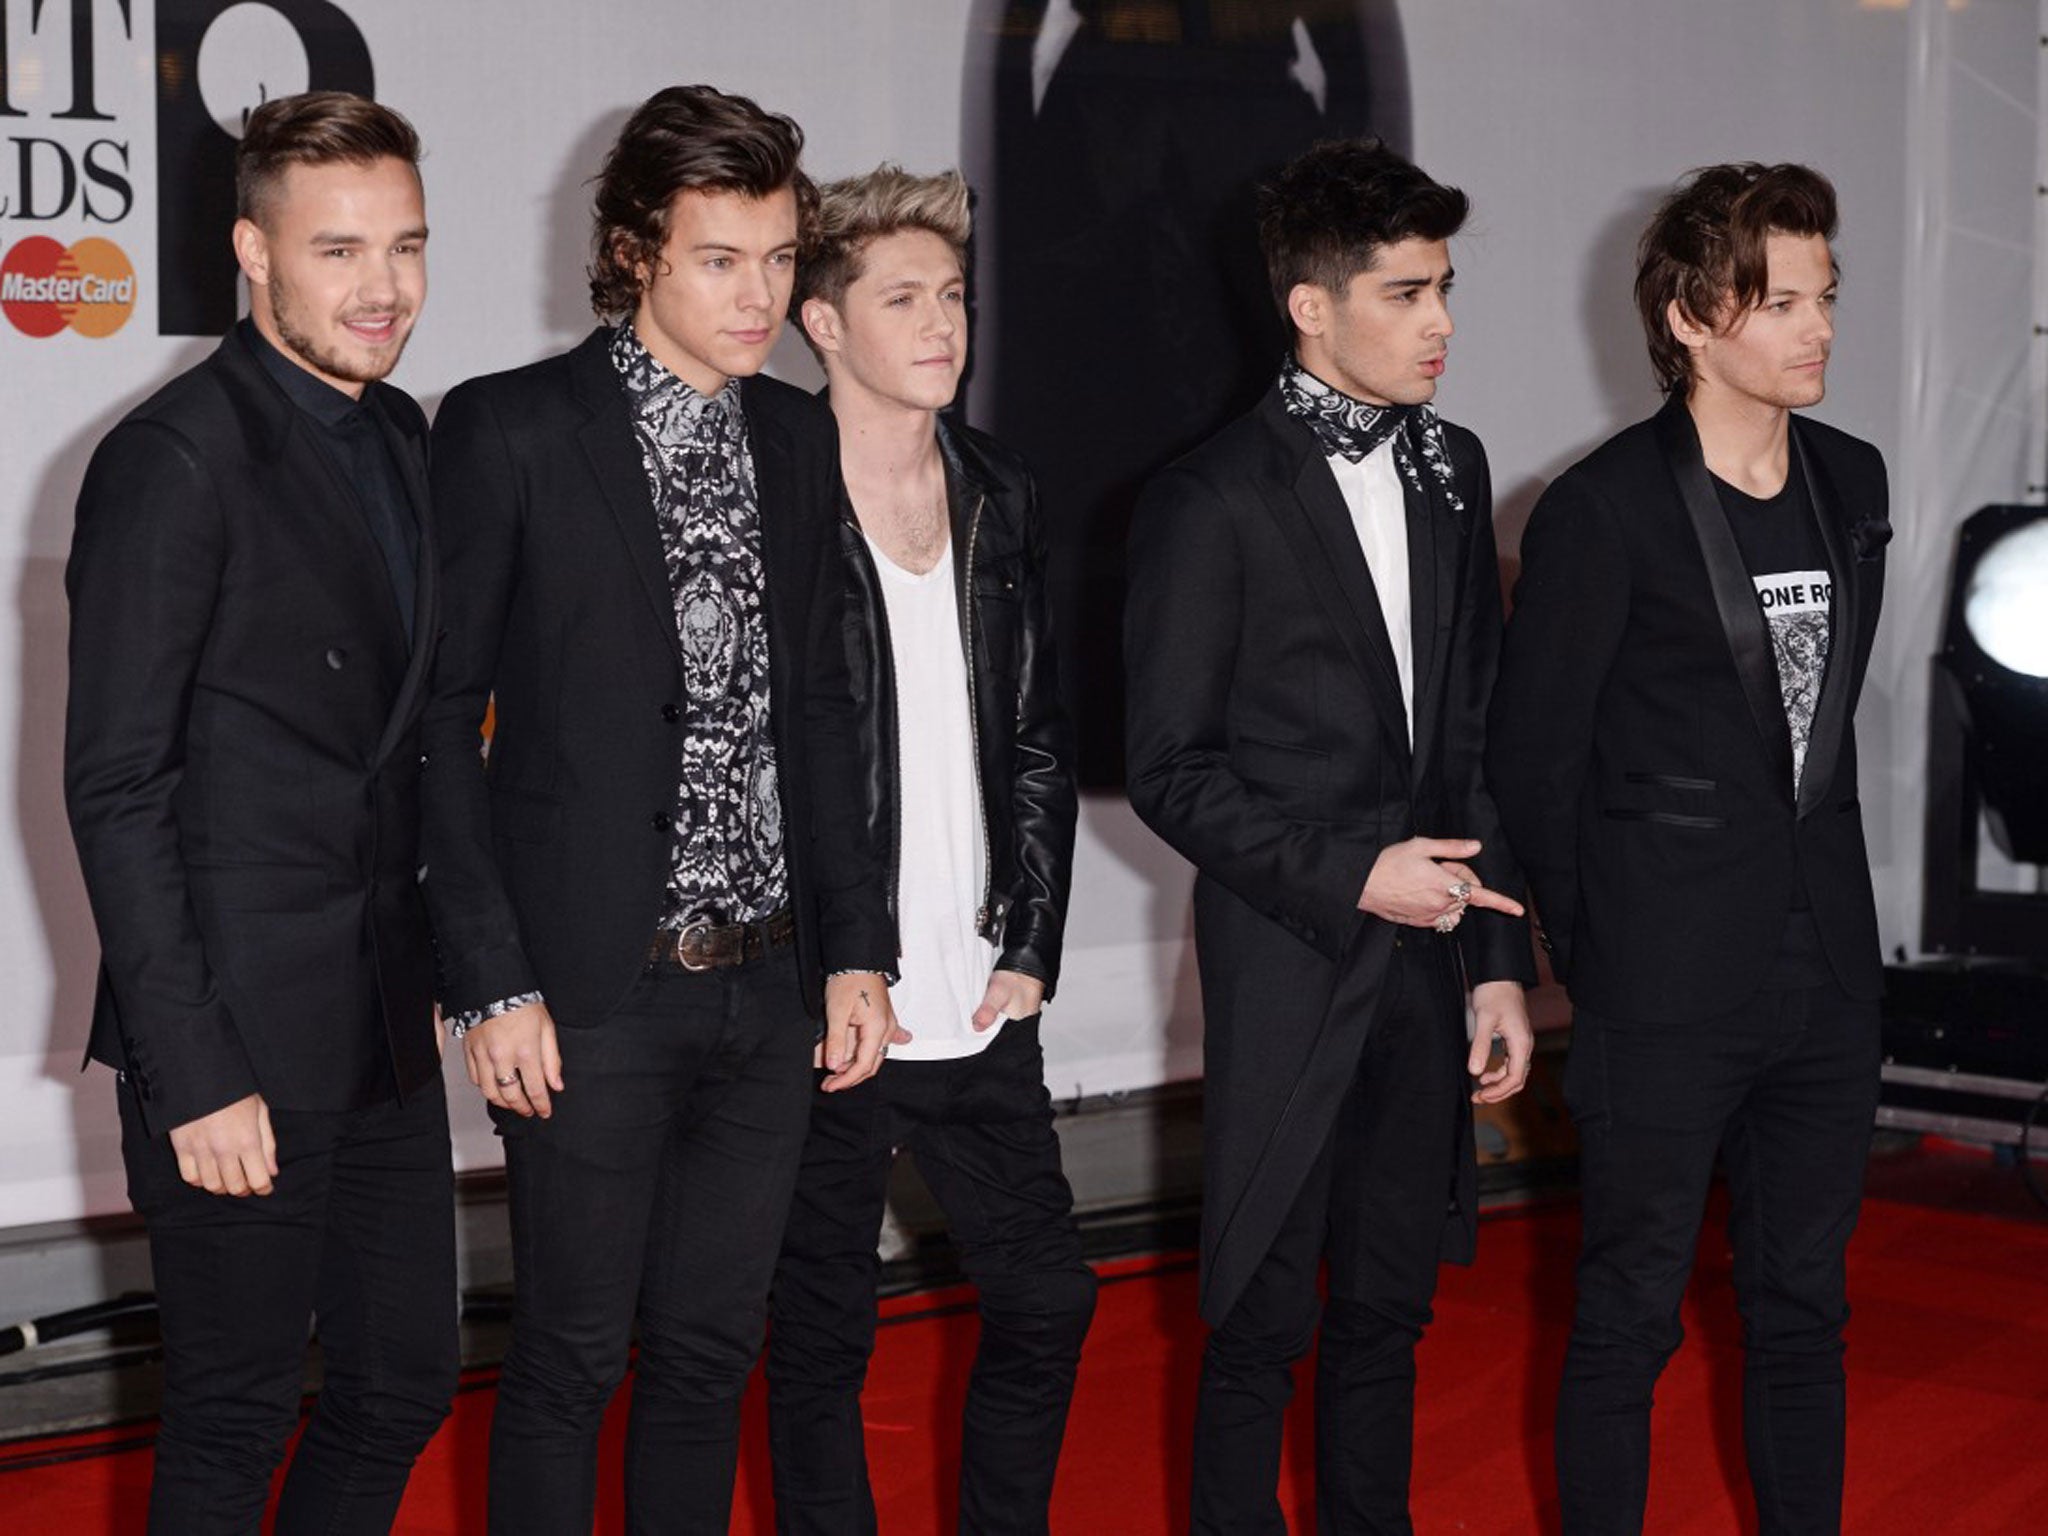 One Direction arrive on the red carpet at the Brit Awards 2014